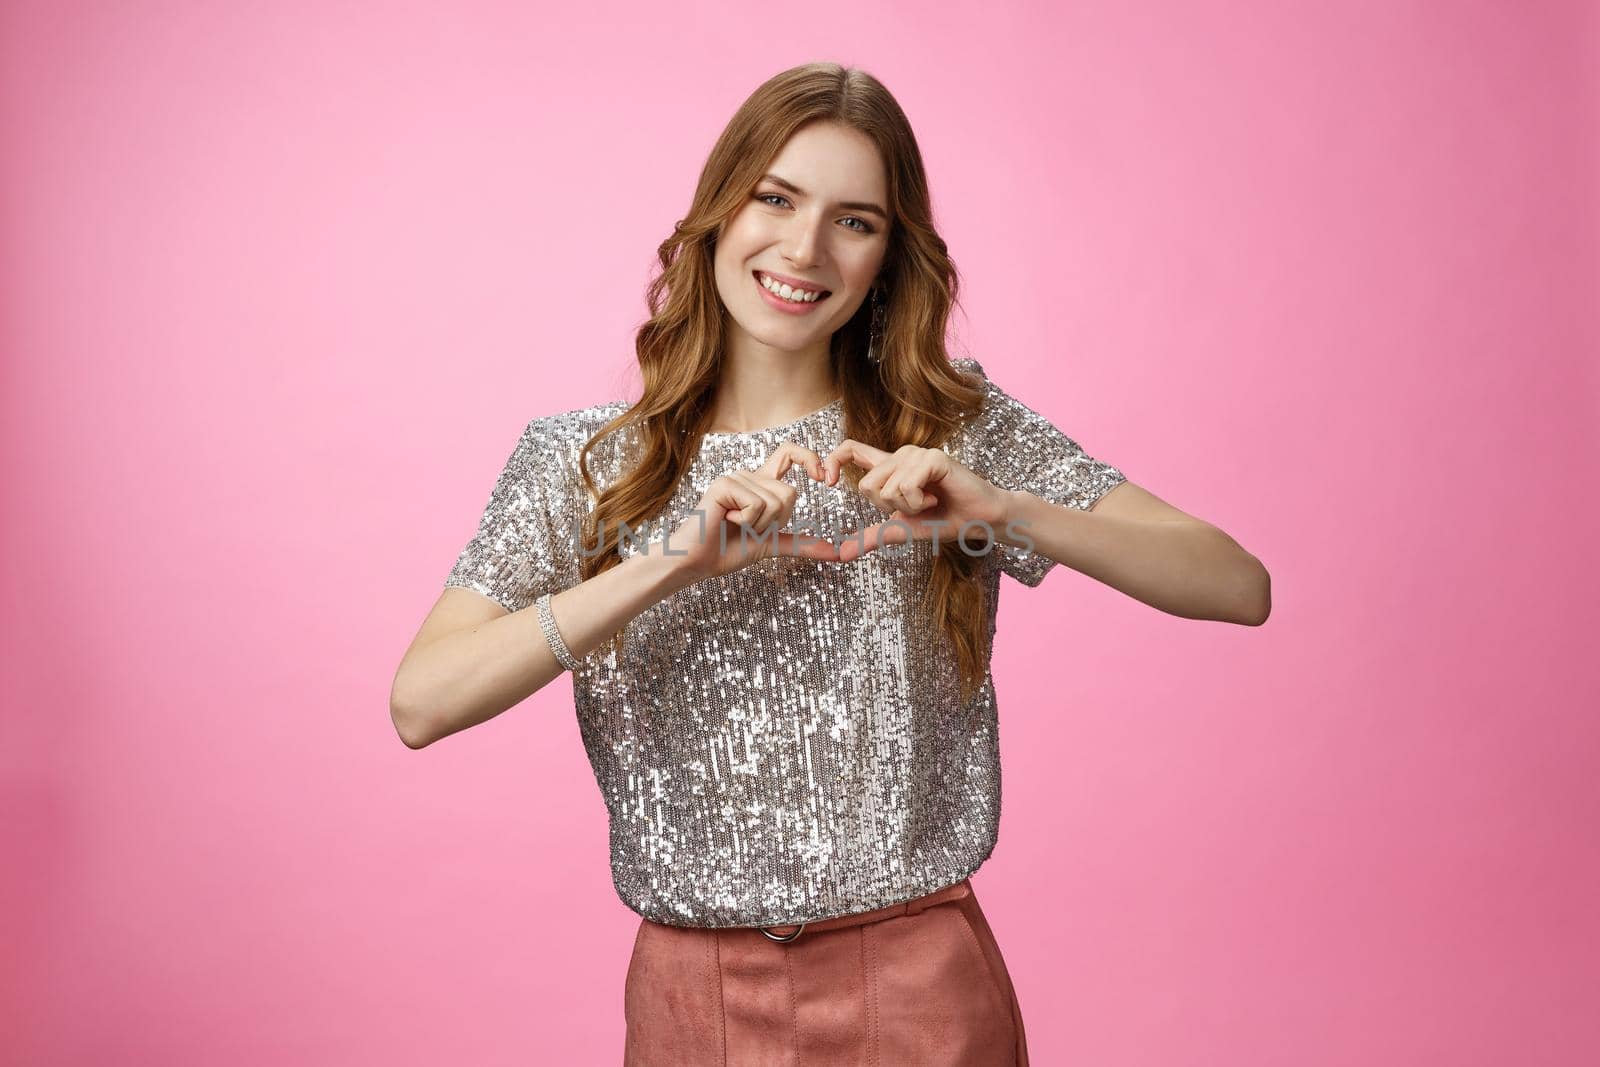 Charming lovely glamour european girlfriend expressing love sympathy afferction smiling cute show heart gesture in love boyfriend adore family relatioship, friendship concept, pink background.